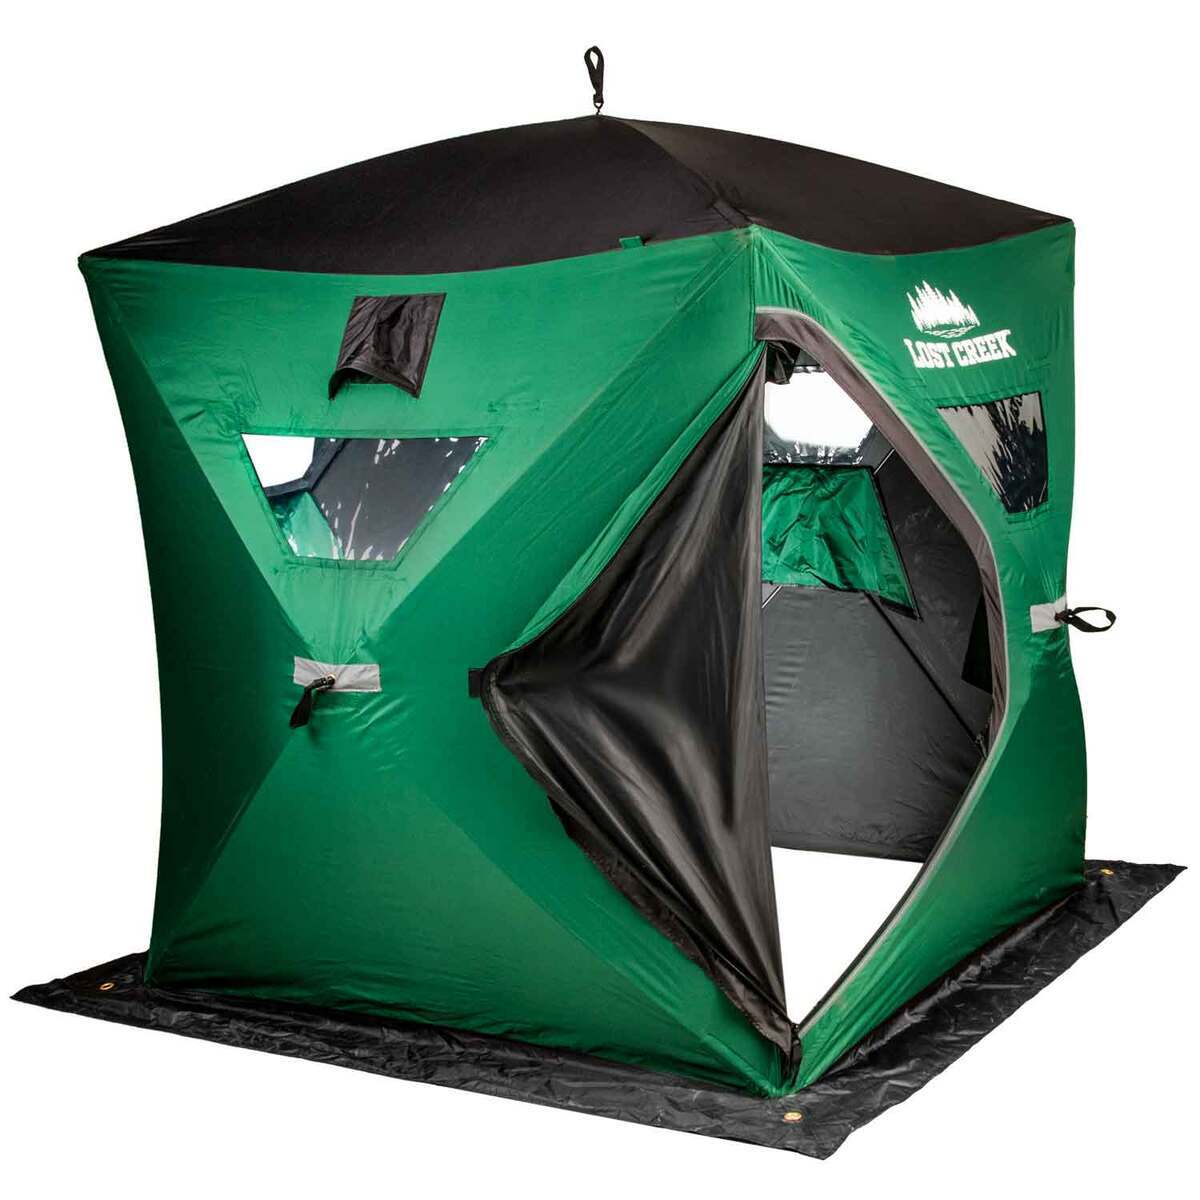 Lost Creek Gale Force 3-Man Hub Ice Fishing Shelter - Green by Sportsman's Warehouse